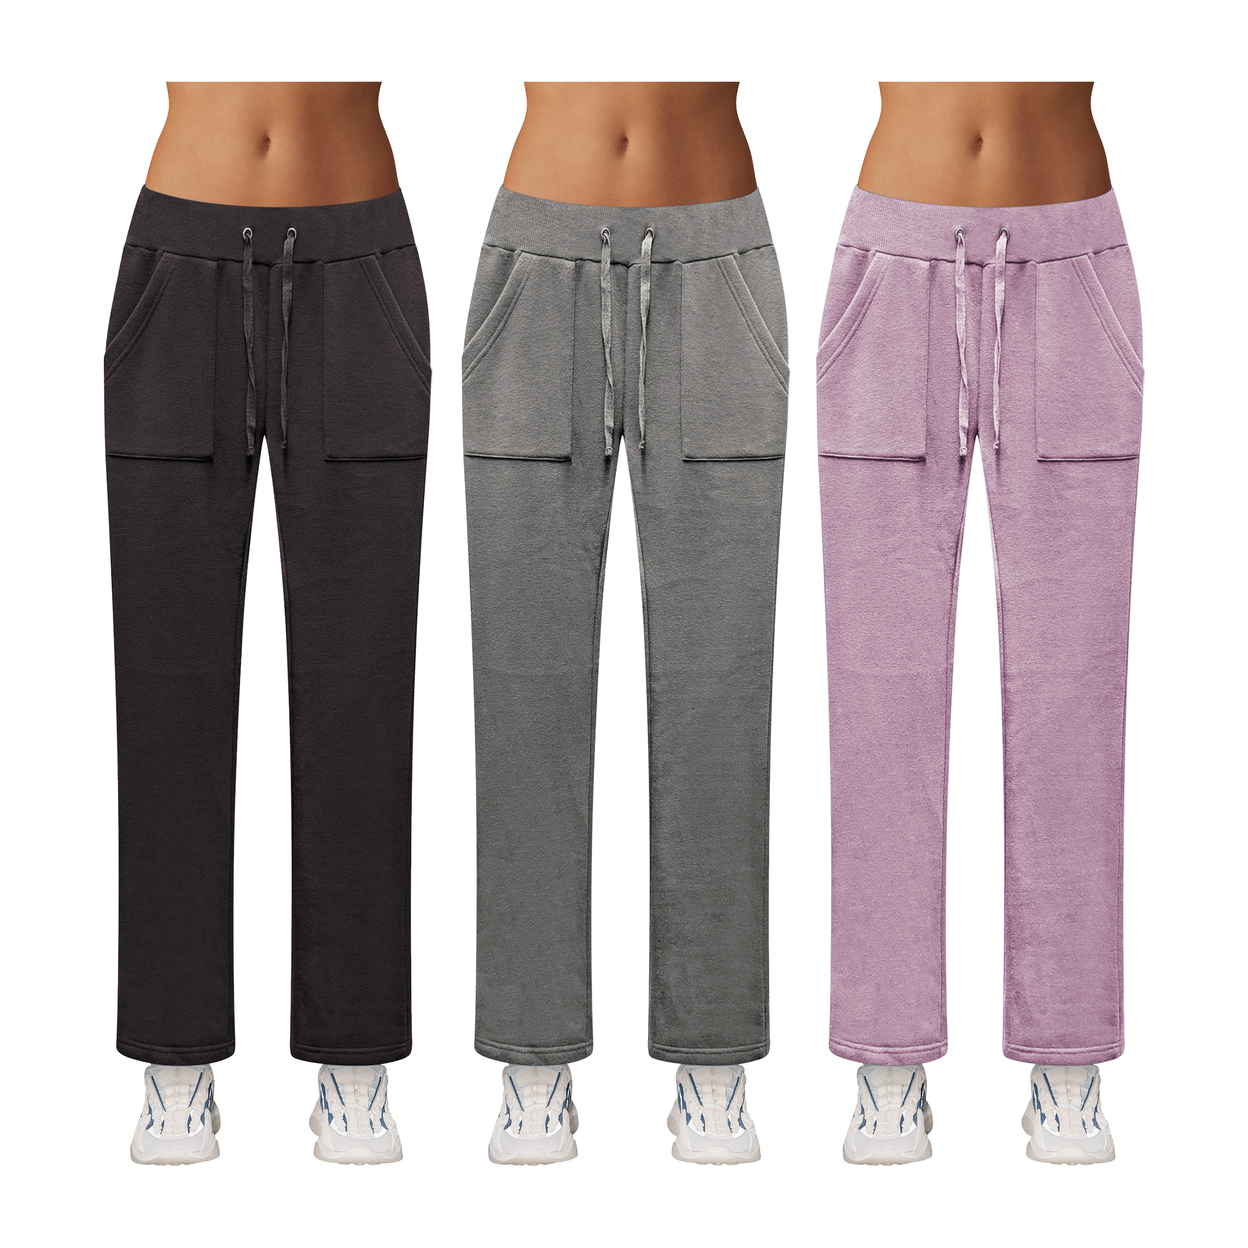 Multi-Pack: Women's Ultra-Soft Cozy Fleece Lined Elastic Waistband Terry Knit Pants - 1-Pack, Small